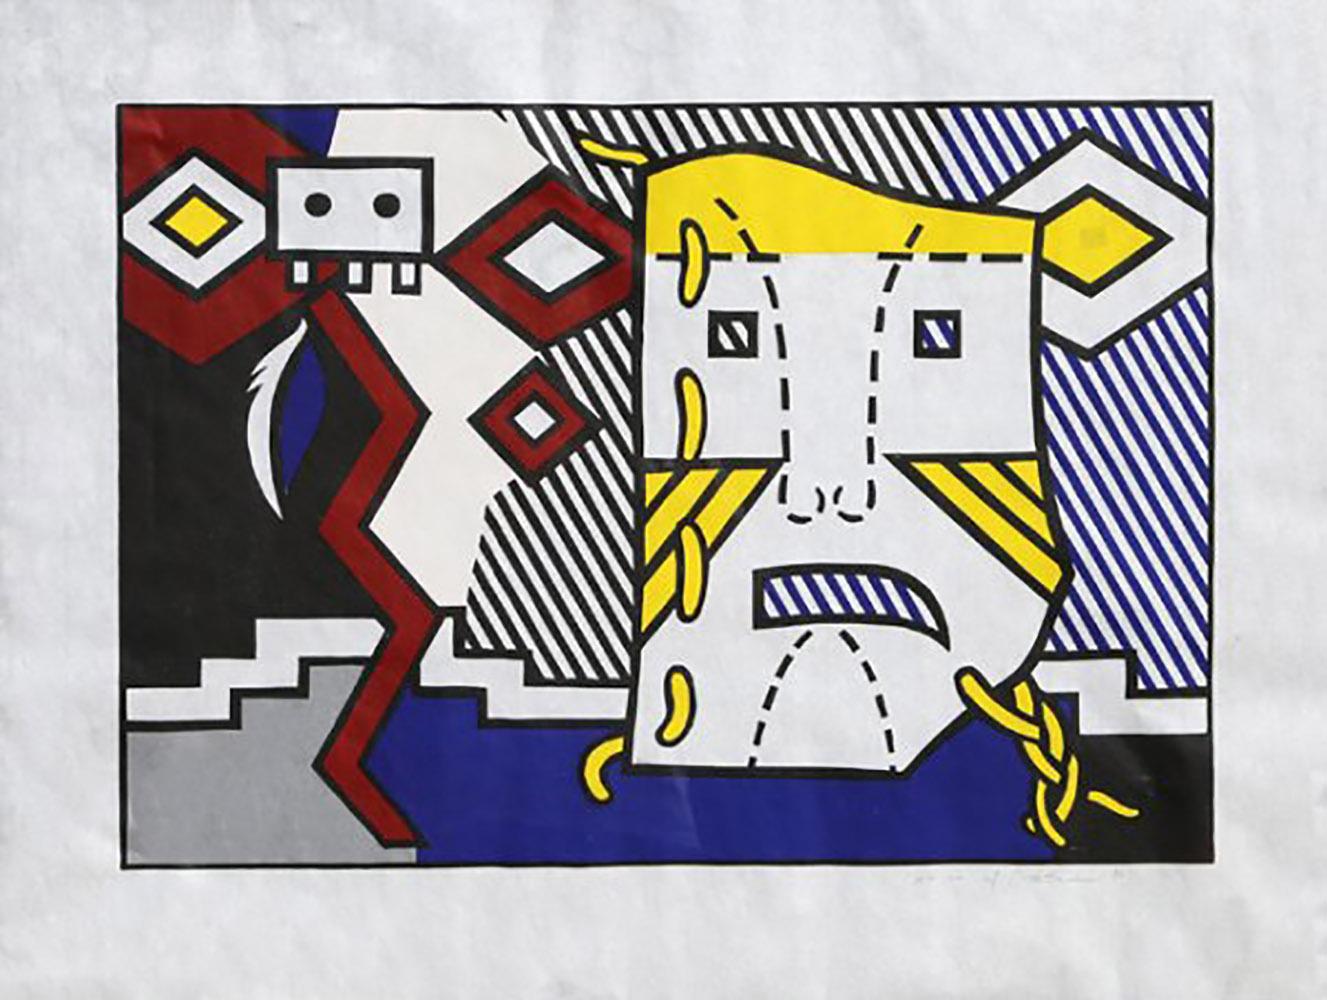 American Indian Theme V (C. 164)
By
Roy Lichtenstein - American (1923–1997)
Portfolio: American Indian Theme Series
Date: 1980
Woodcut on Handmade Suzuki Paper, signed and numbered in pencil
Edition of 50, AP 14 (of 18)
Edition number: 13/50
Image